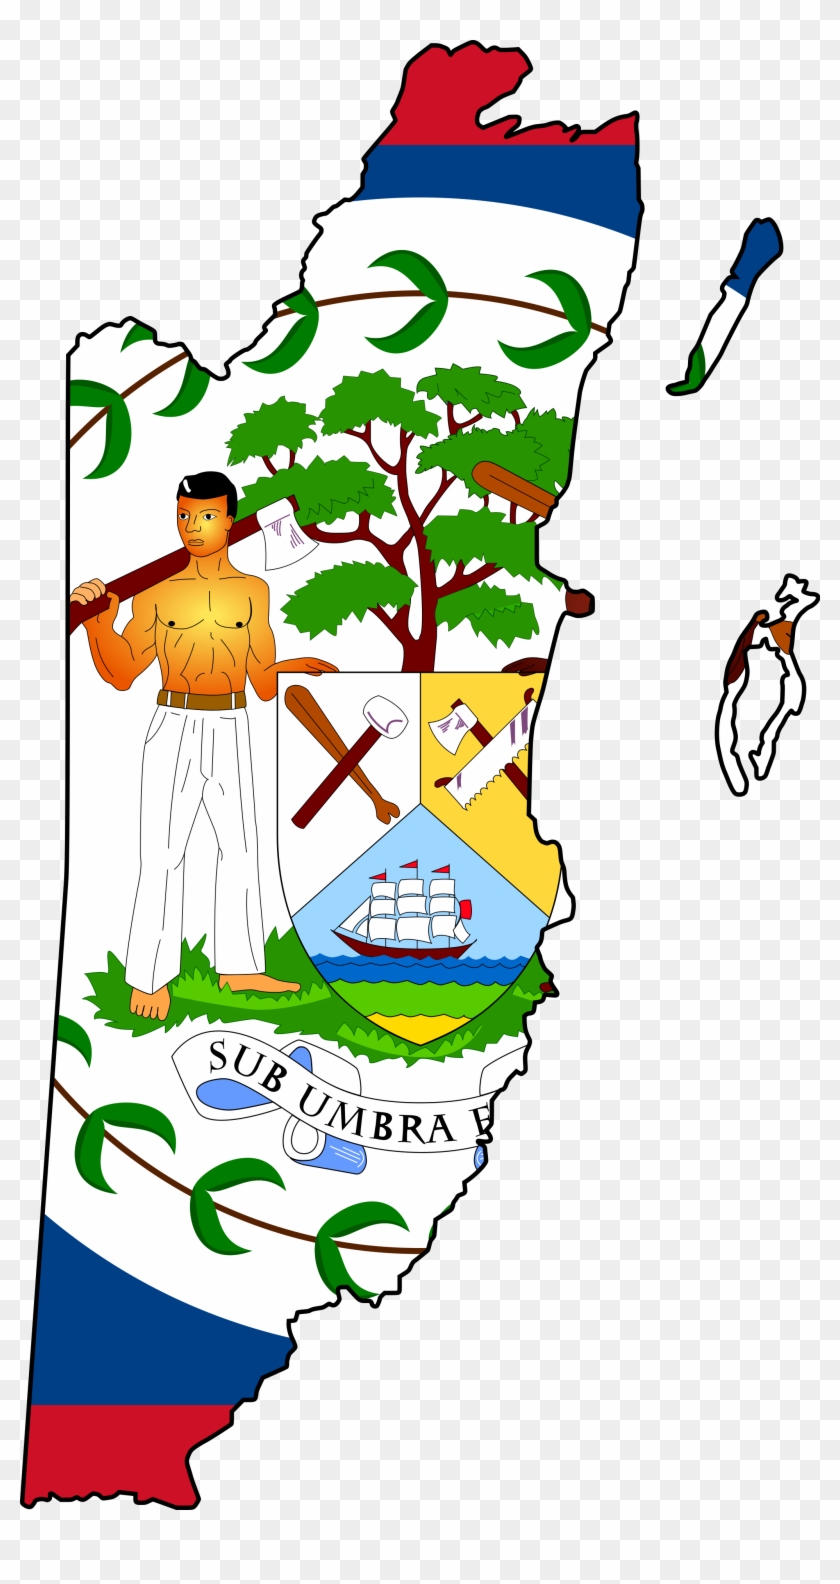 Belizean Pride Proud To Be One - Red Blue Flag With White Circle Clipart #2482216